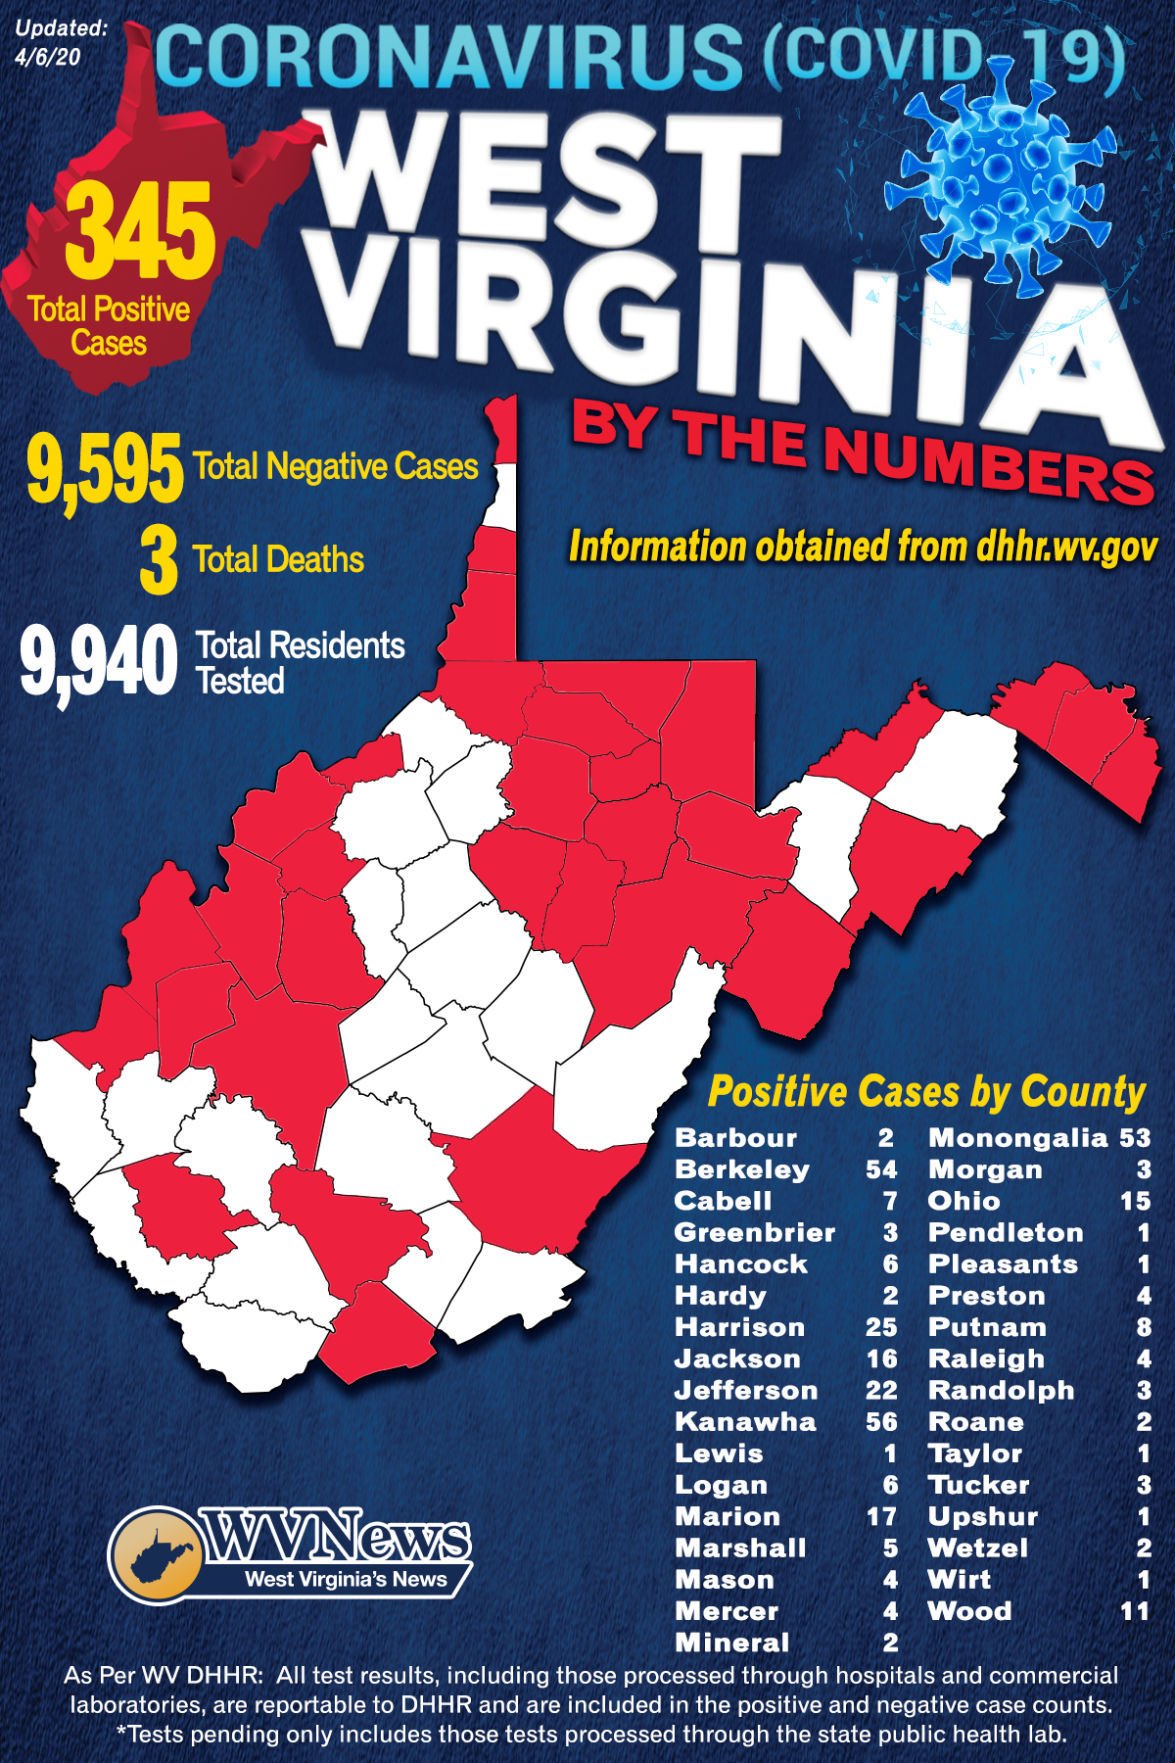 Wv Dhhr 21 New Covid 19 Cases Confirmed 345 Total More Positive Projections Released Wv News Wvnews Com